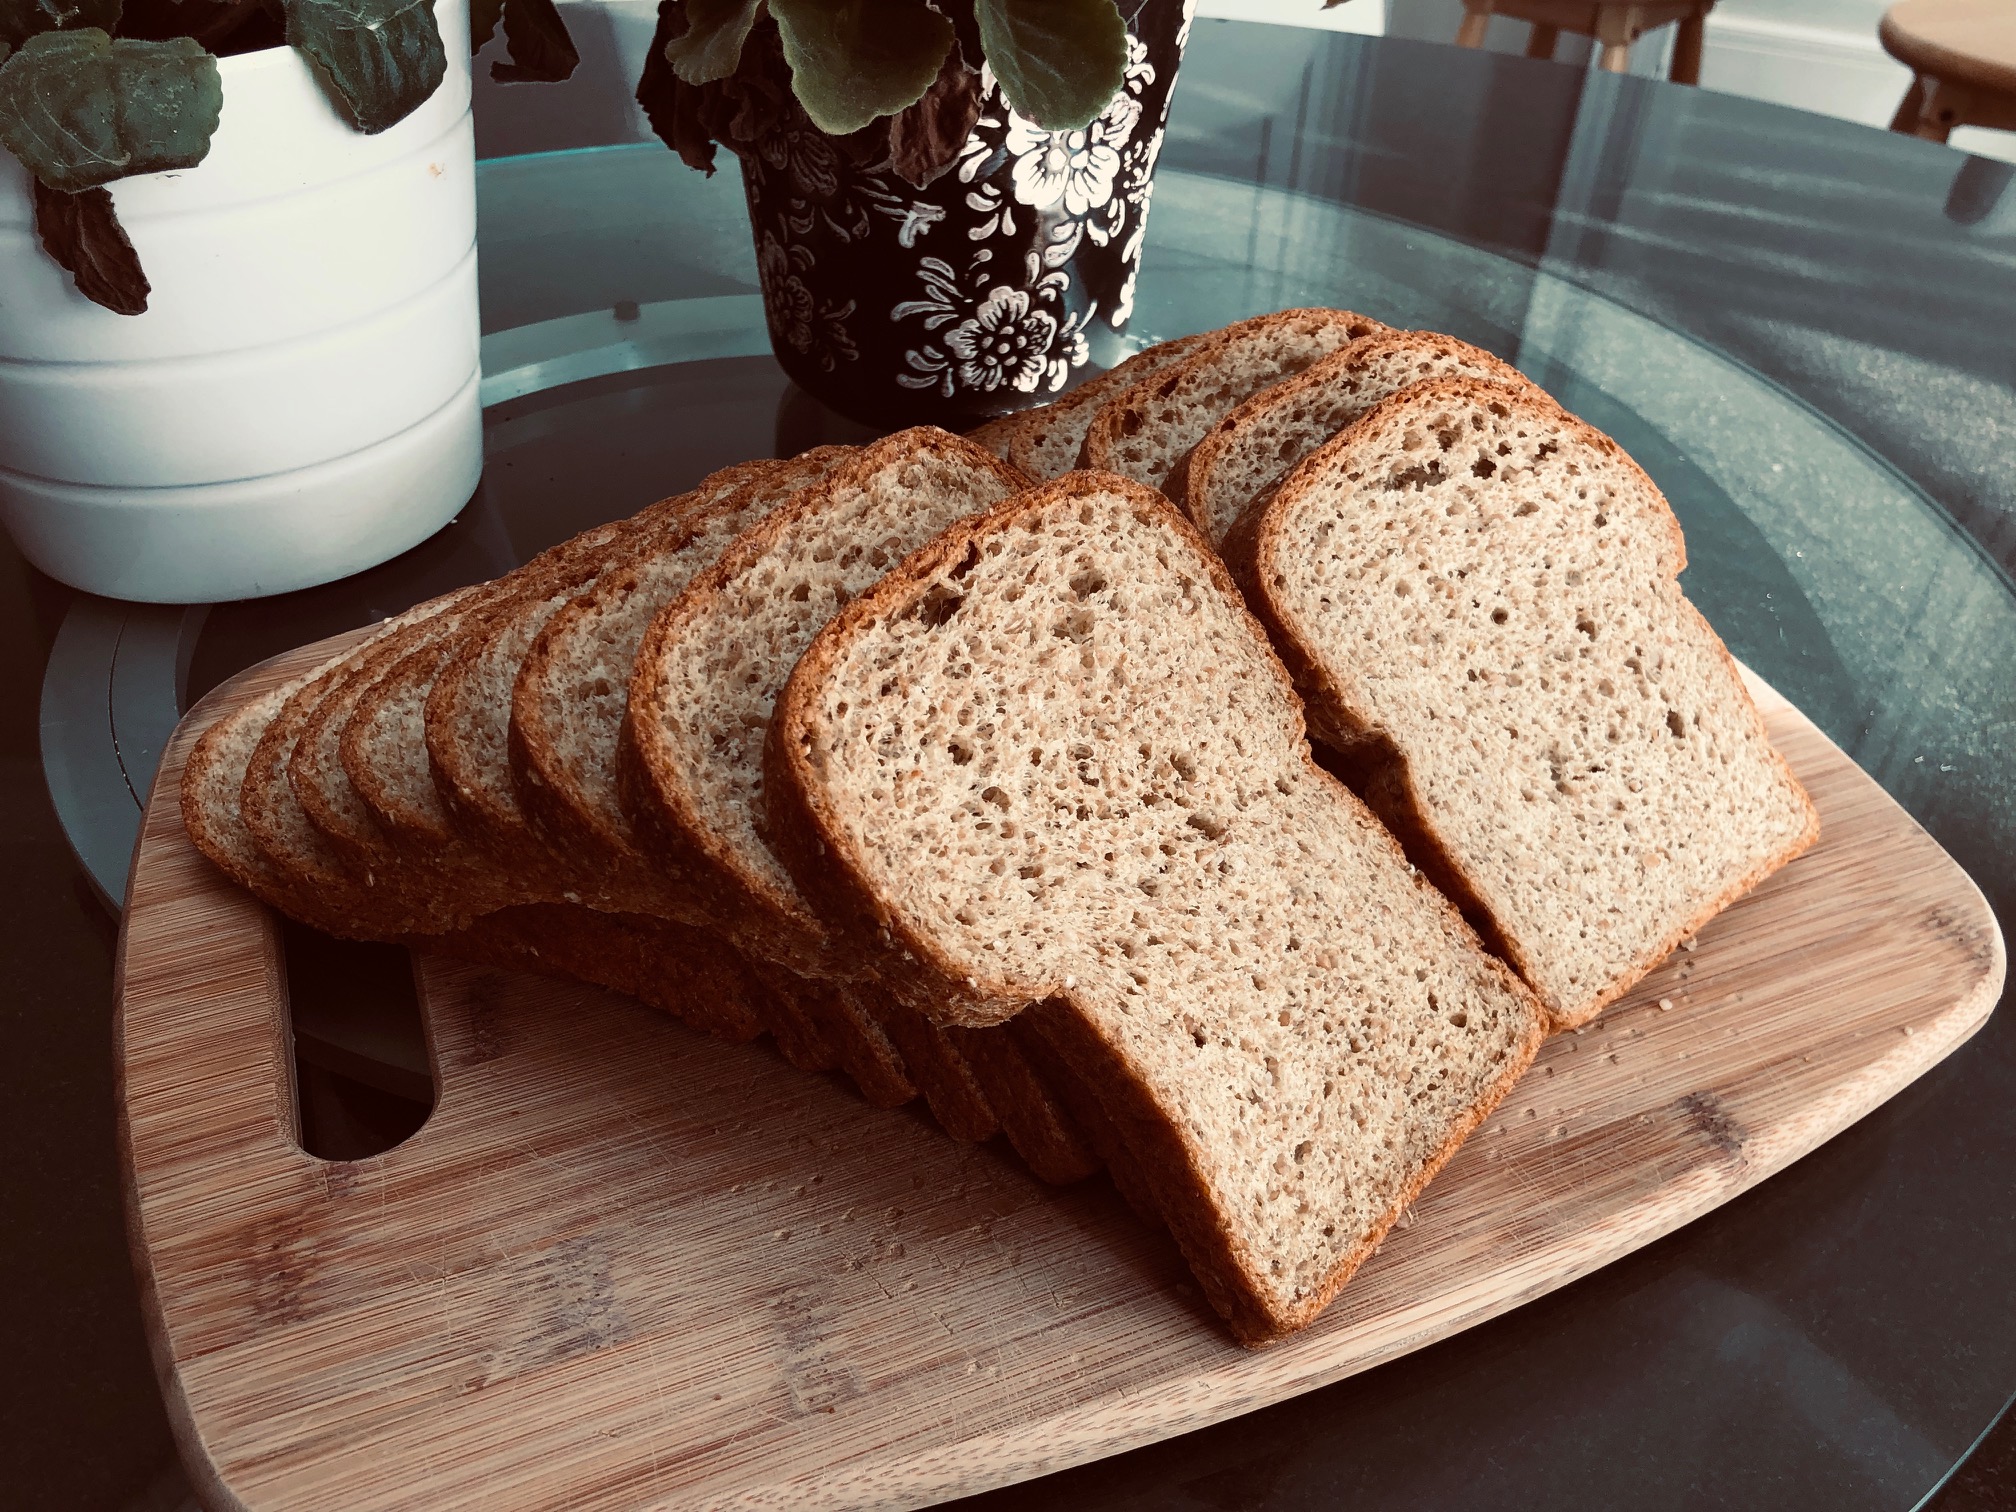 Top 5 Healthy Low Carb Breads Bread Lovers Should Try